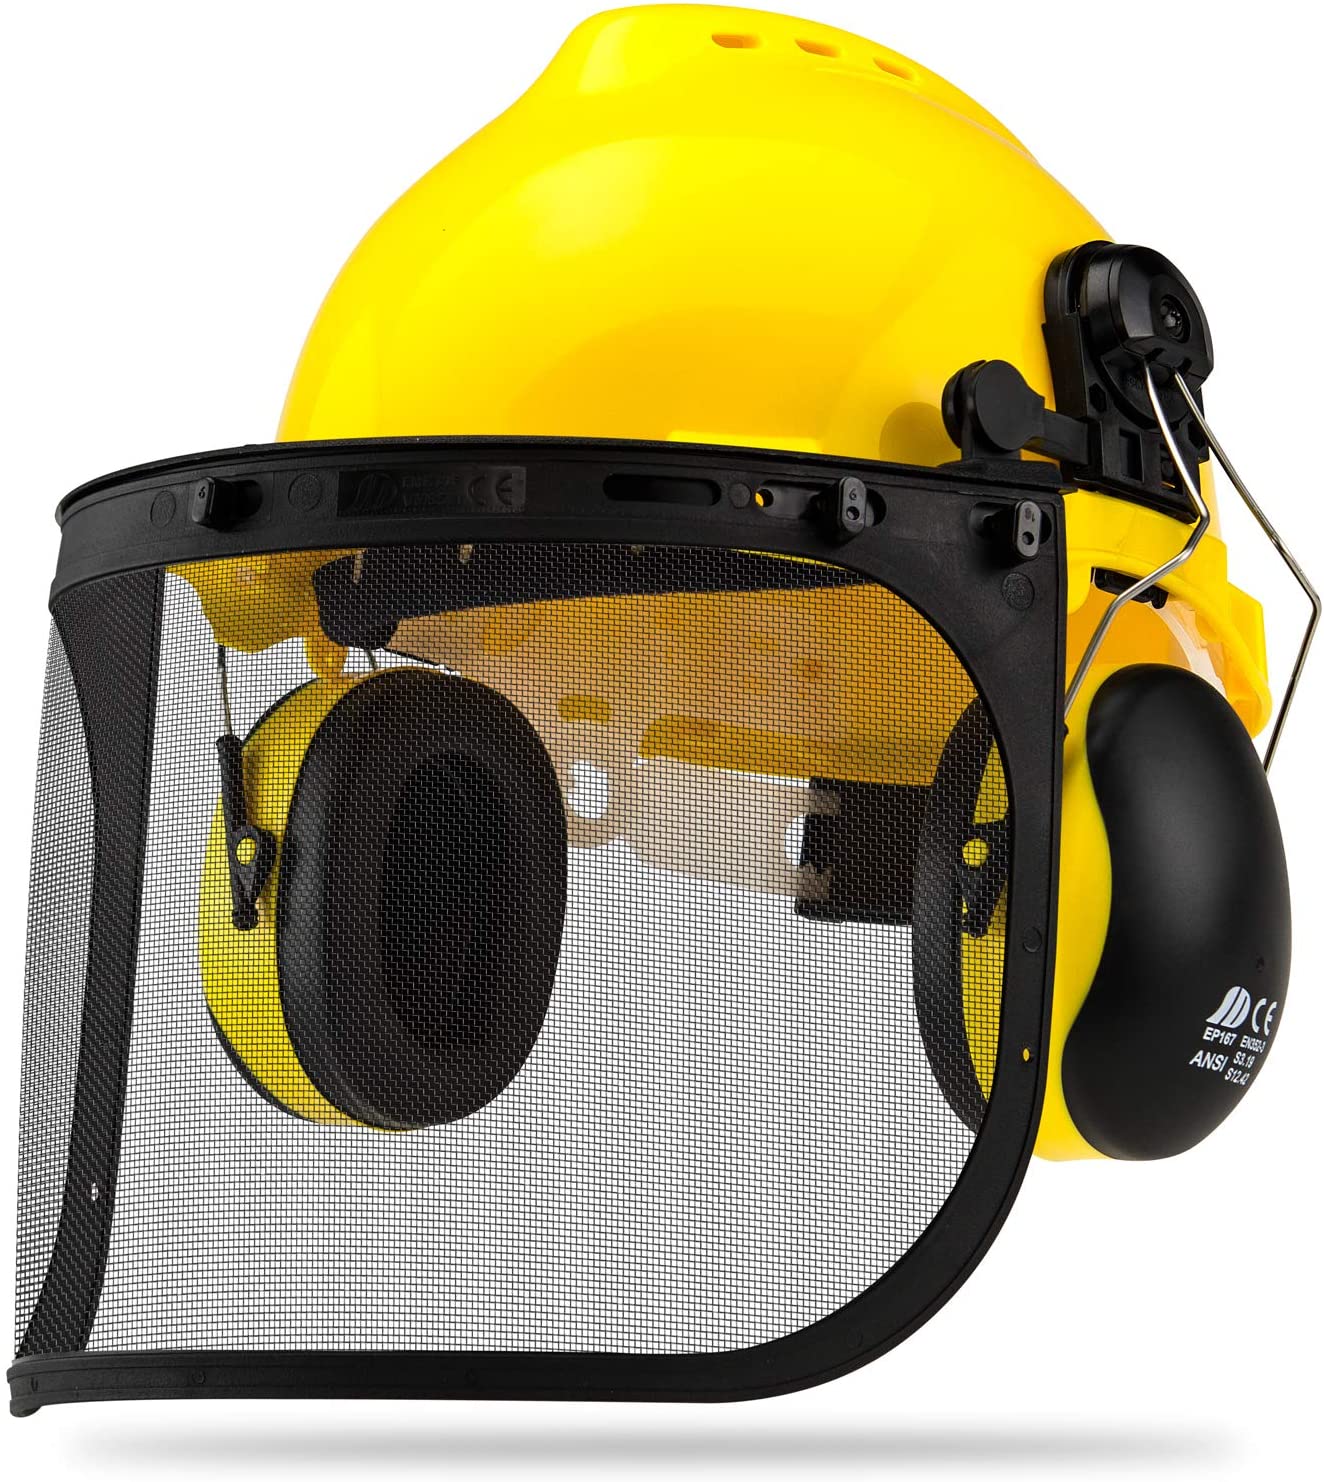 NEIKO 53880A Forestry Safety Helmet with Earmuffs